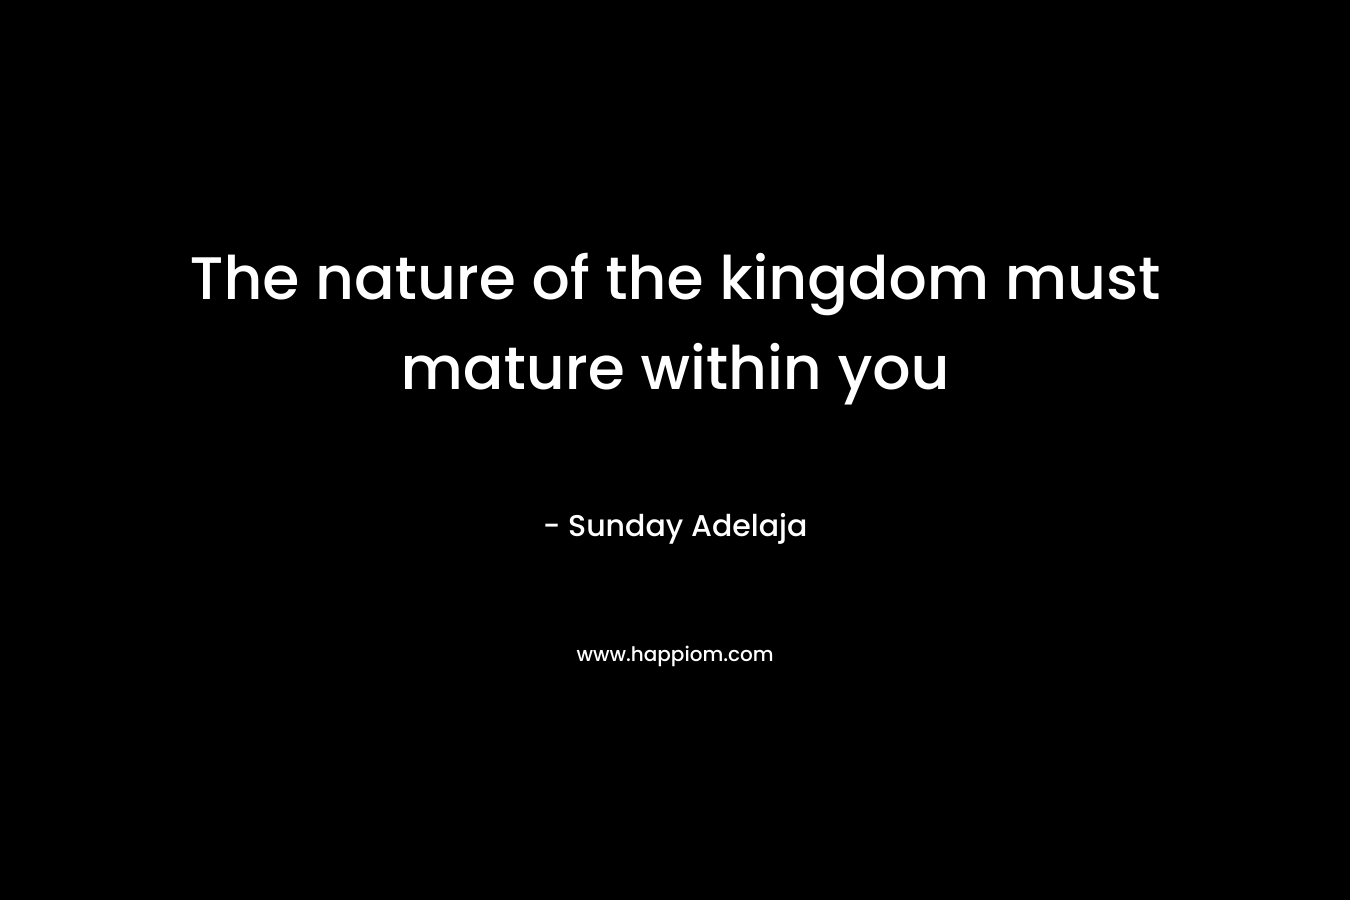 The nature of the kingdom must mature within you